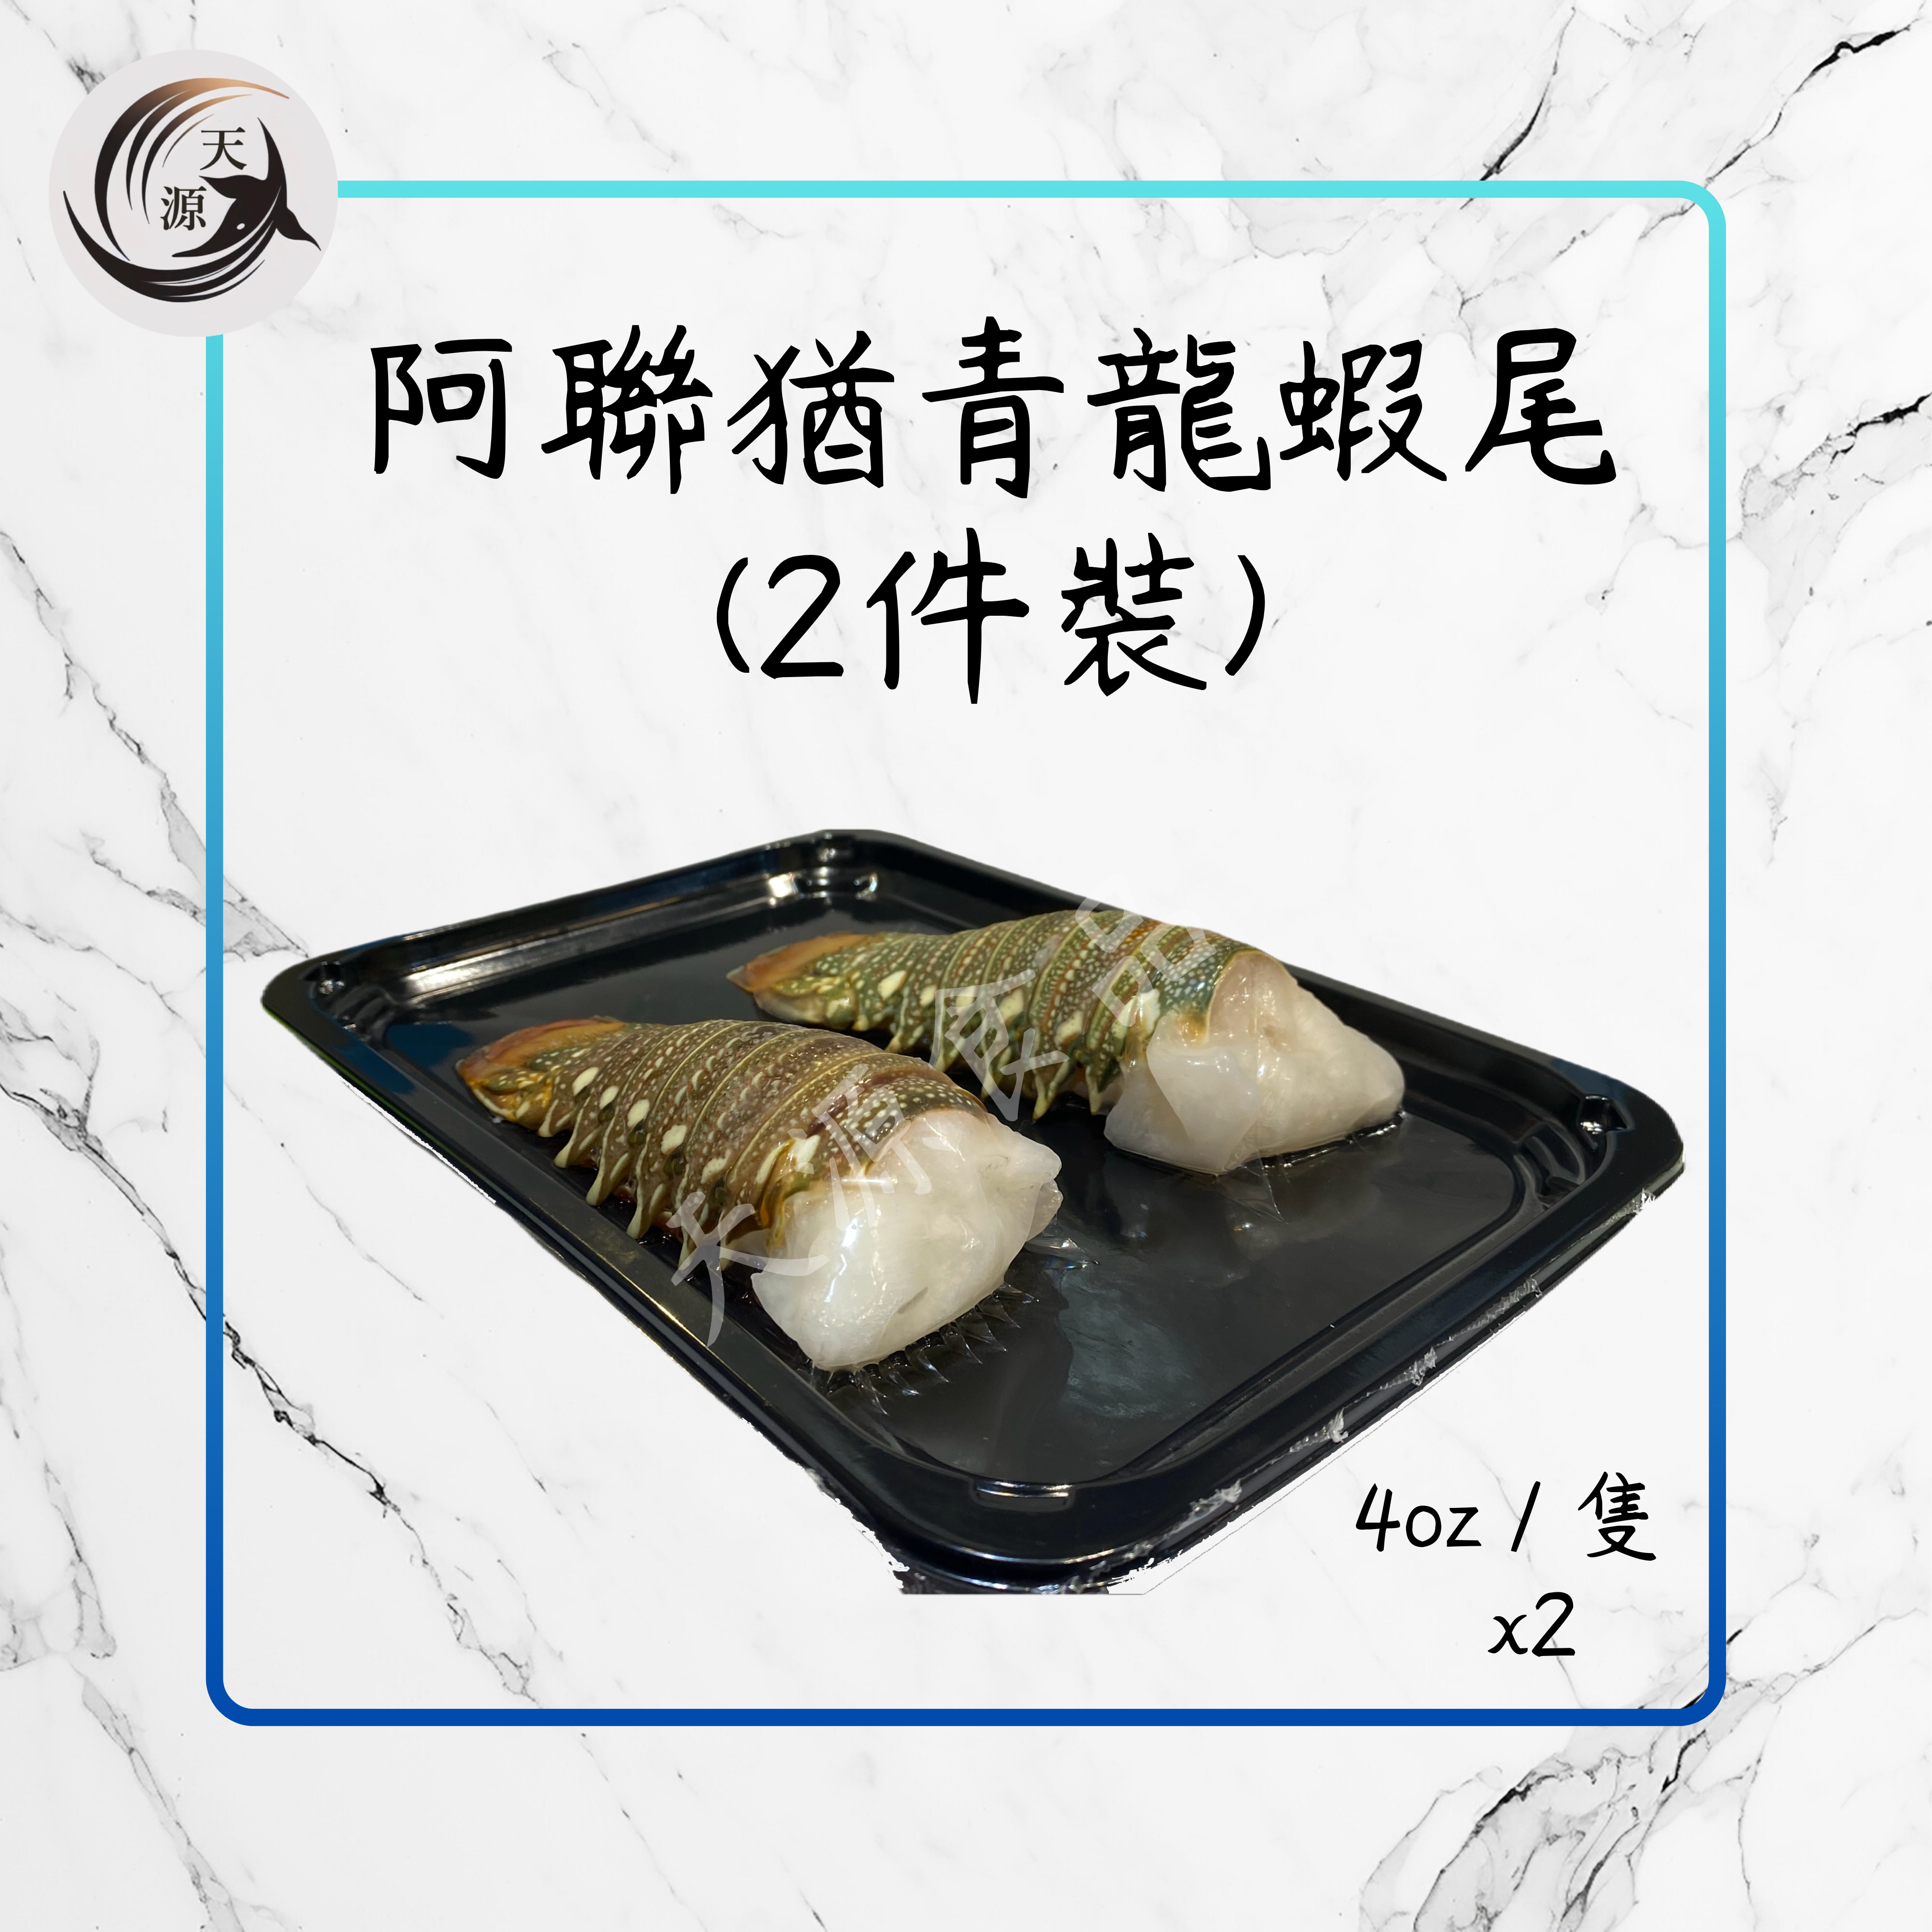 Alianyu green lobster tail 2-pack